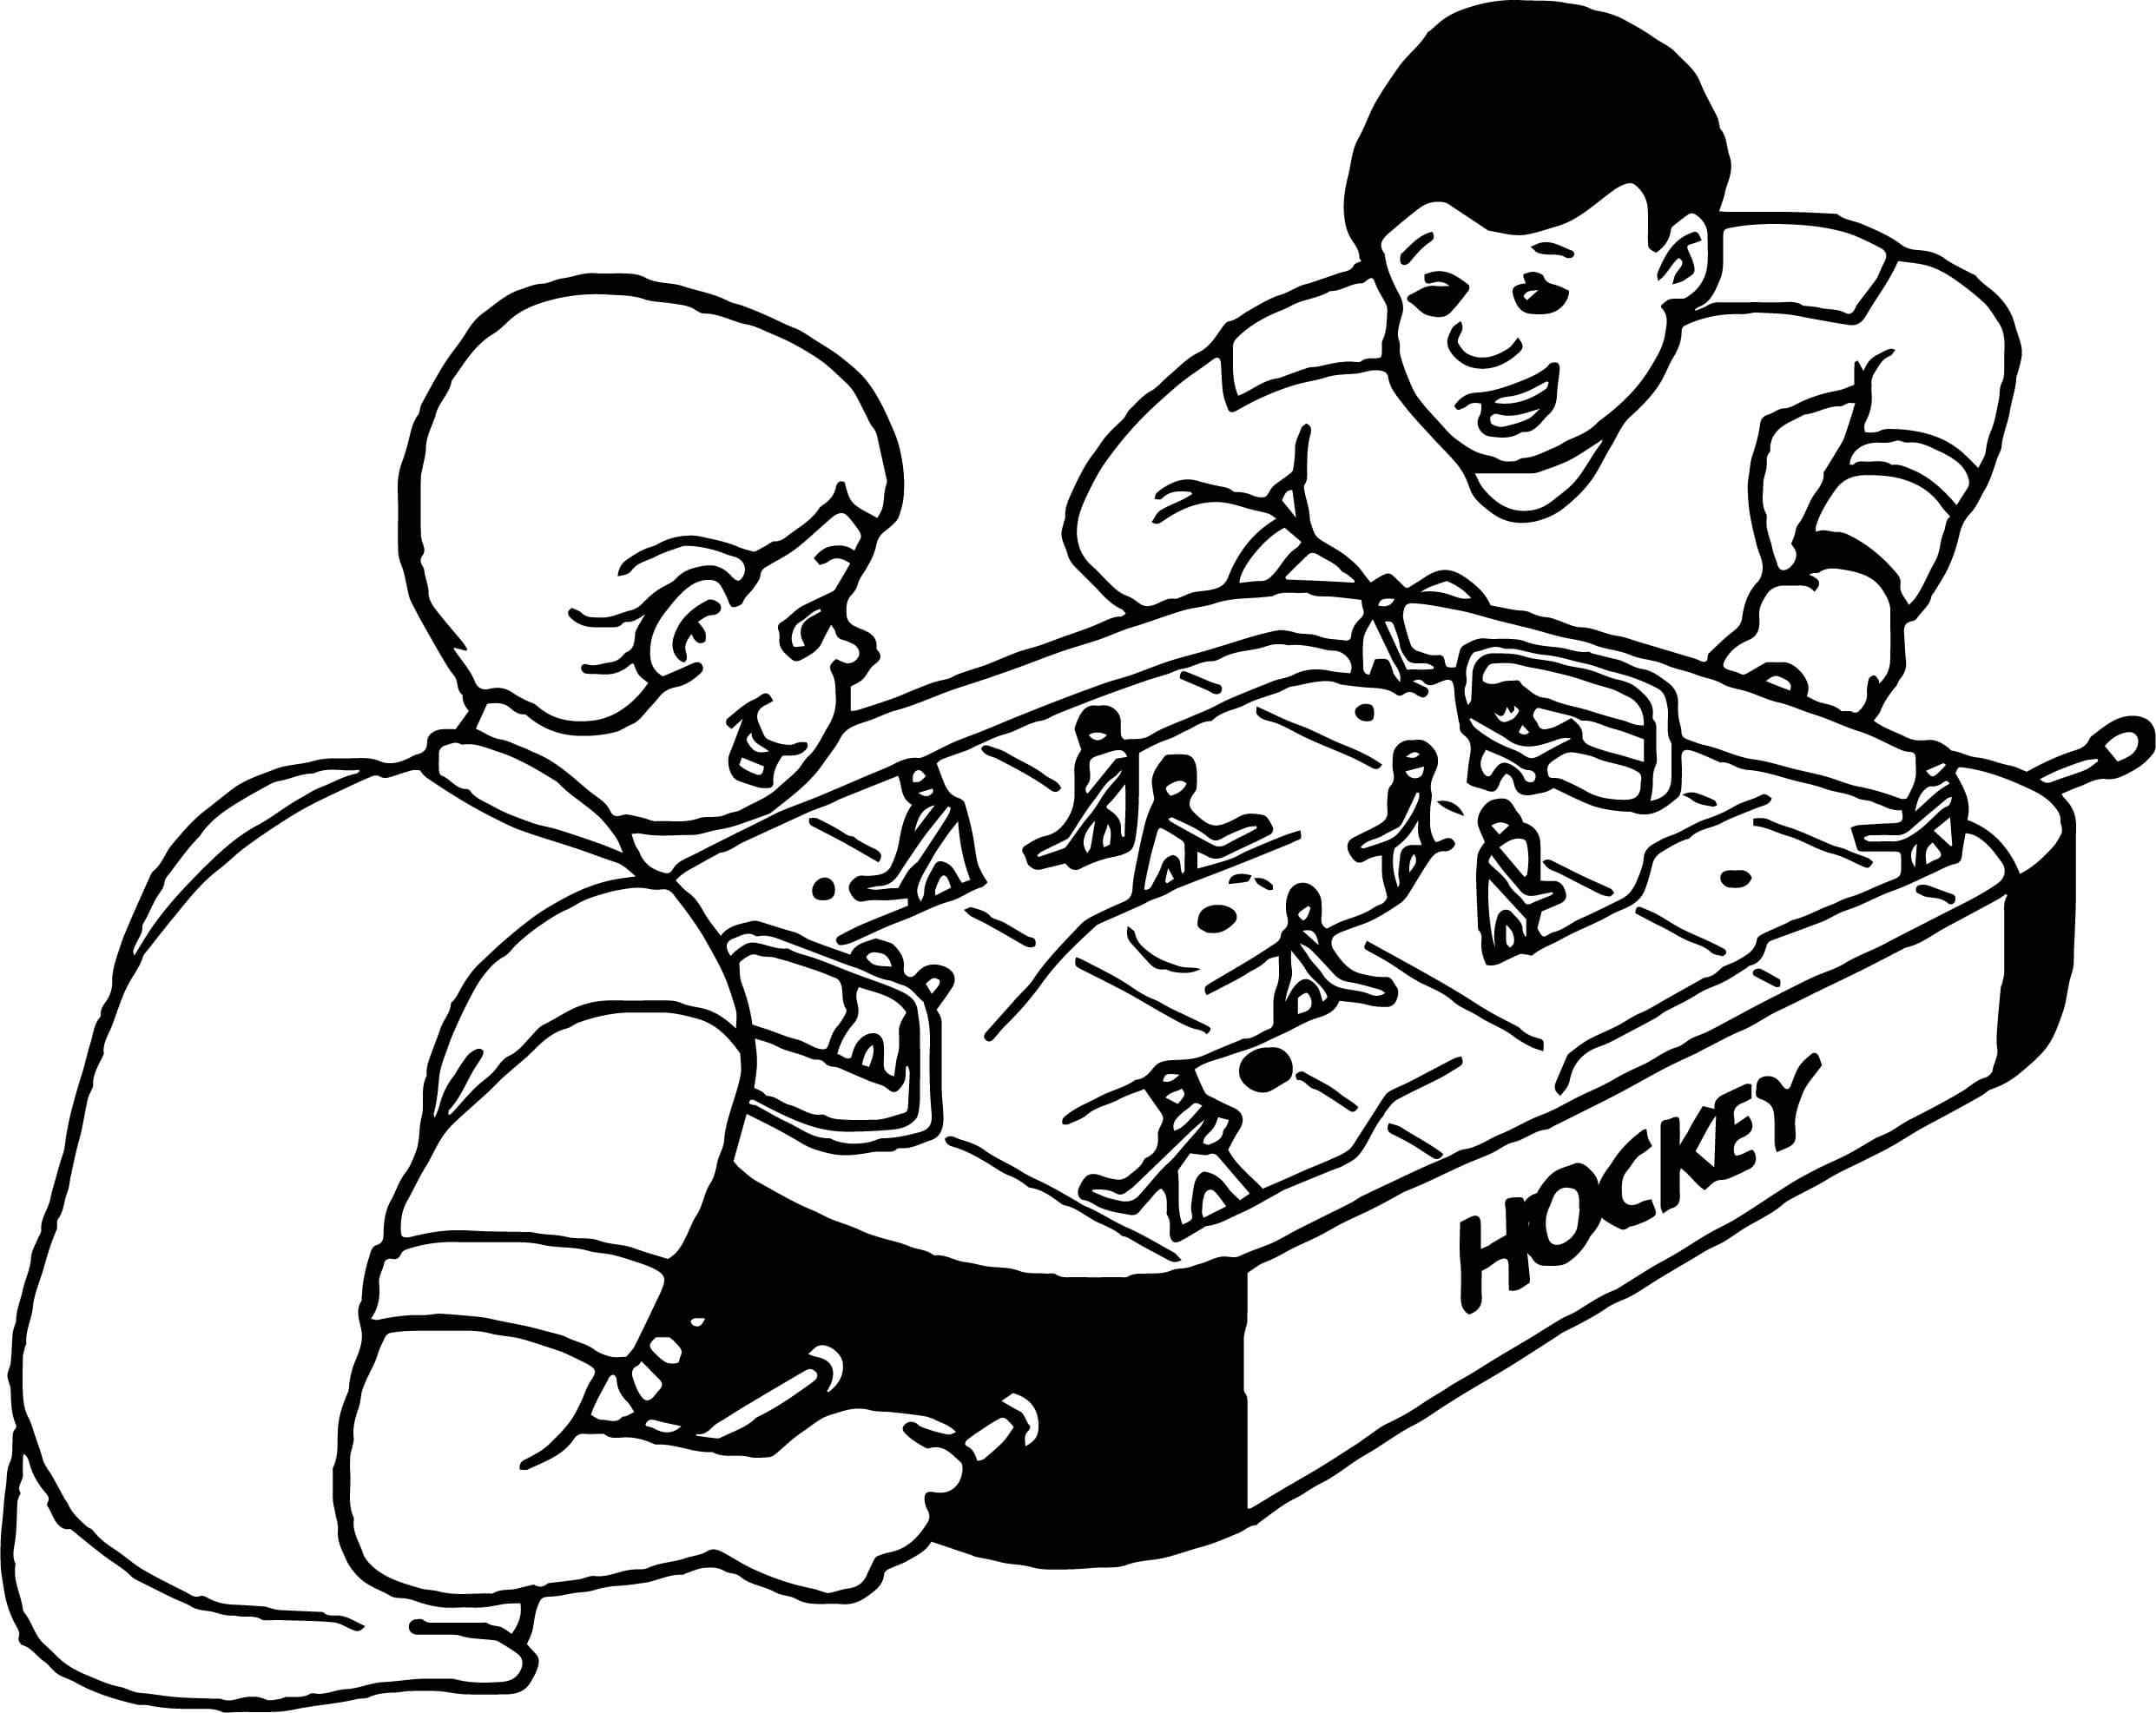 Table Hockey For Playing At Home Coloring Page